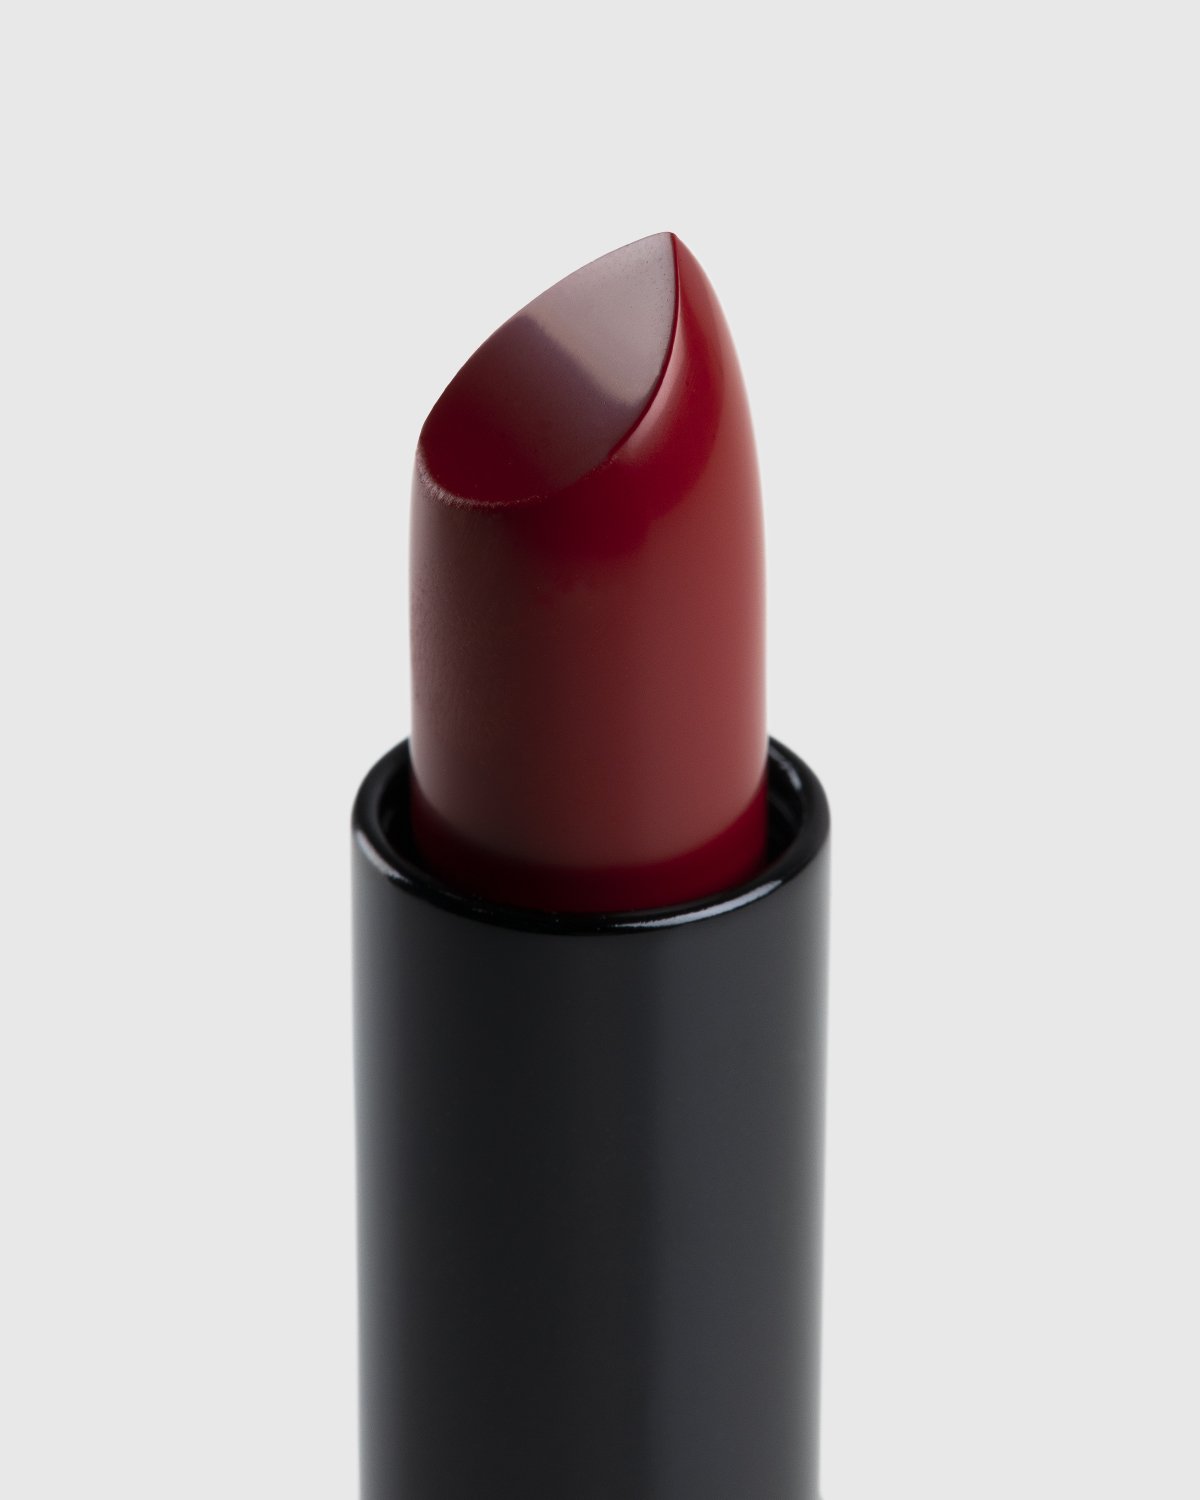 Laurie Simmons x Edward Bess x Highsnobiety - Lipstick - Lifestyle - Red - Image 6